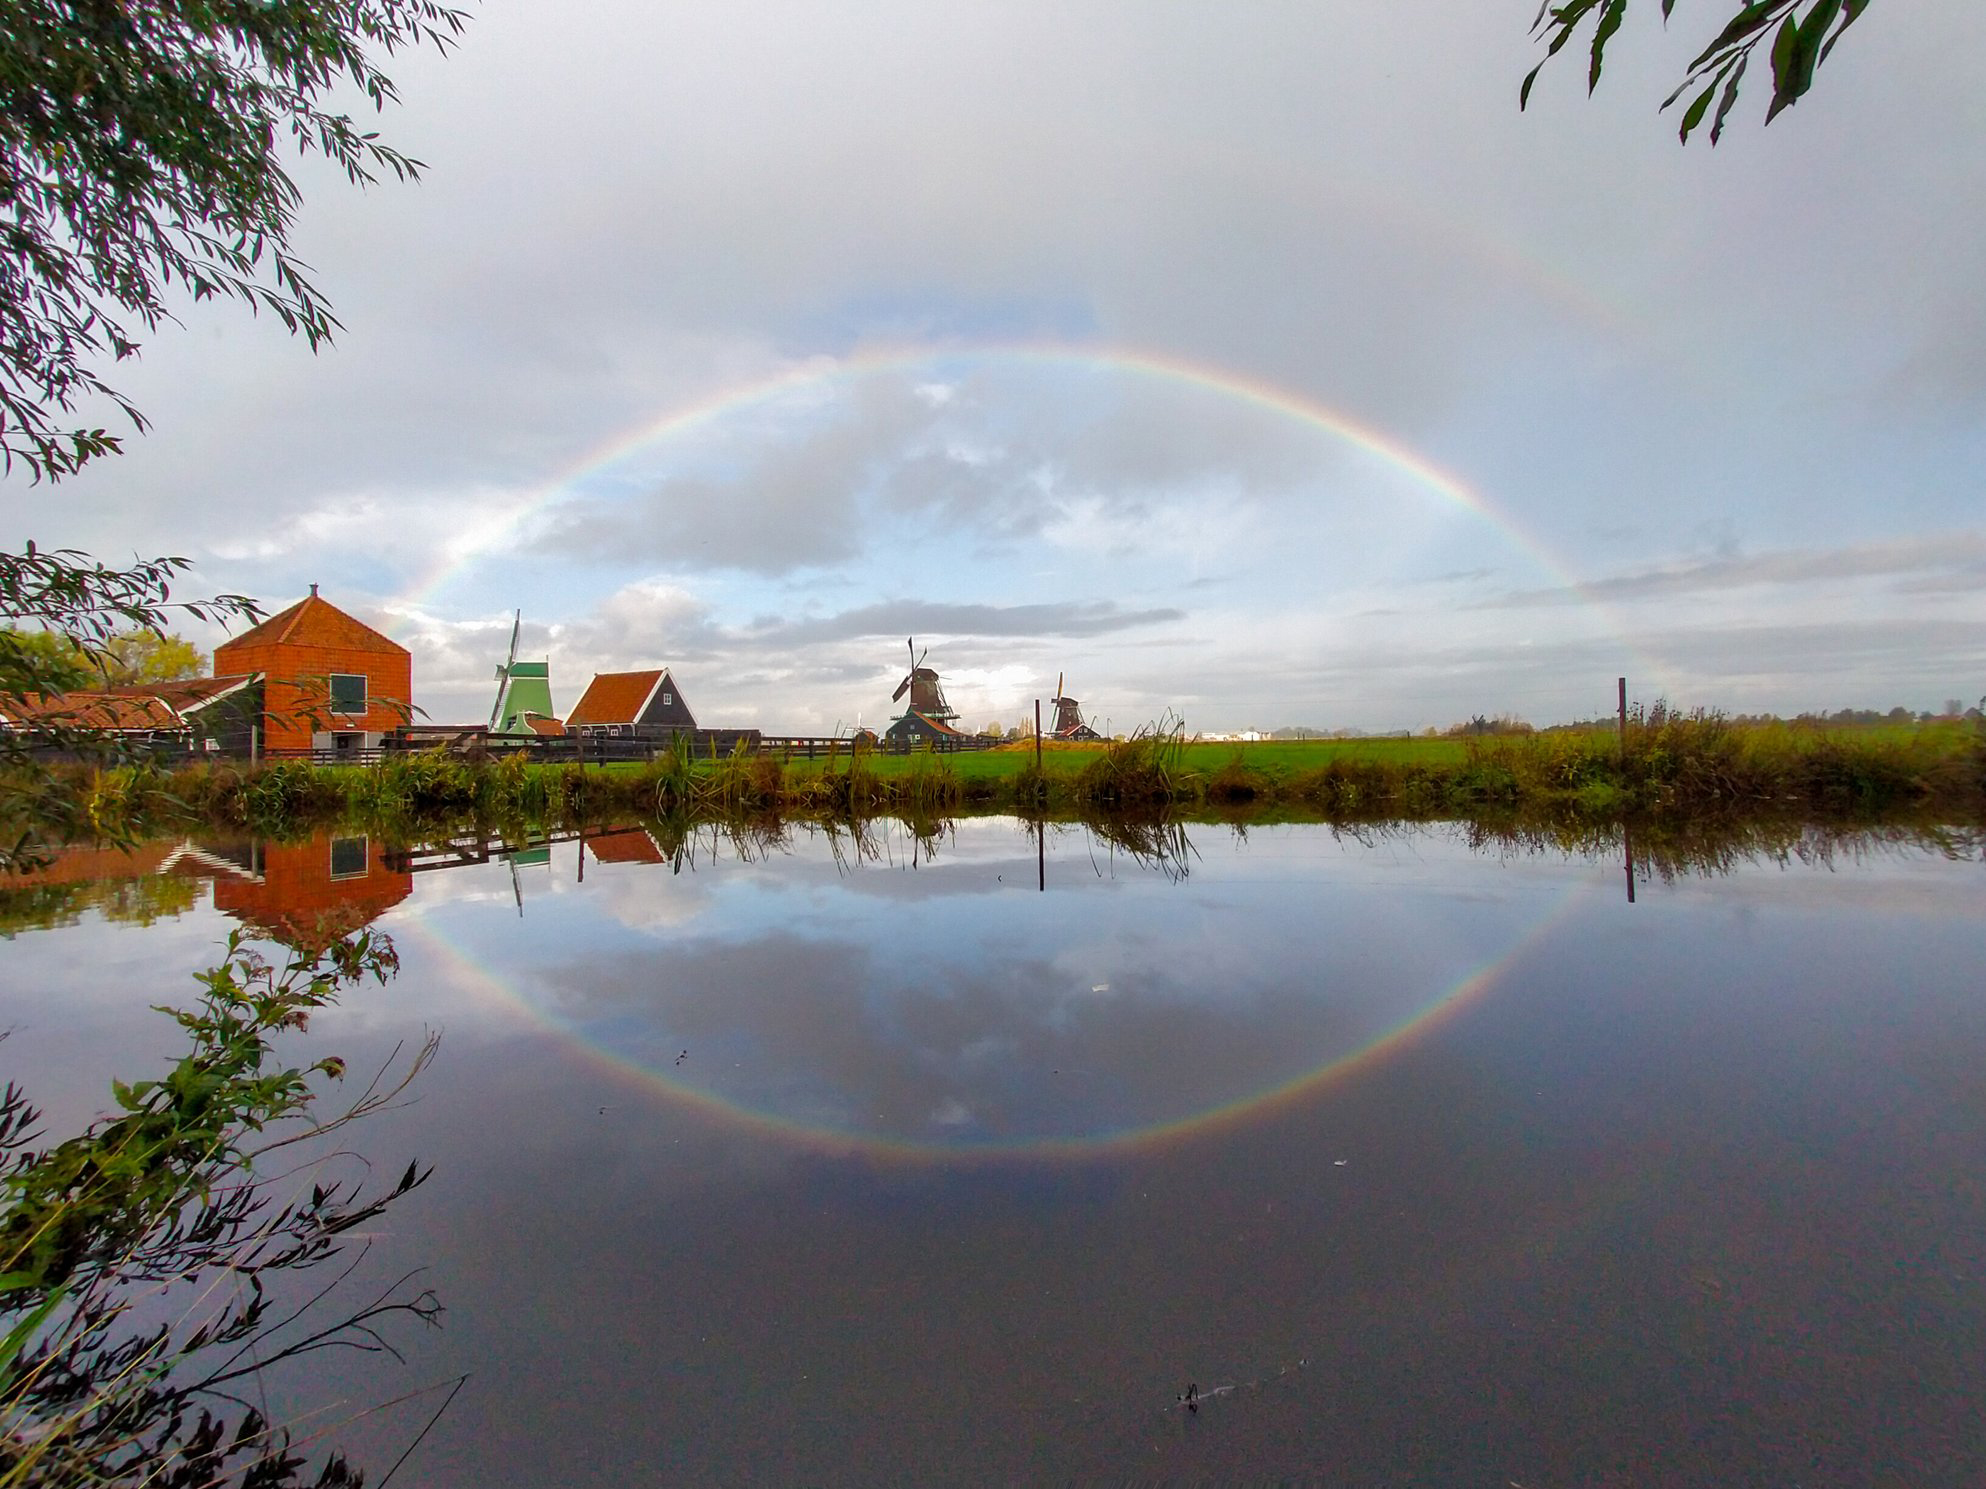 Circular rainbow over a lake with a building, windmill and field in the background